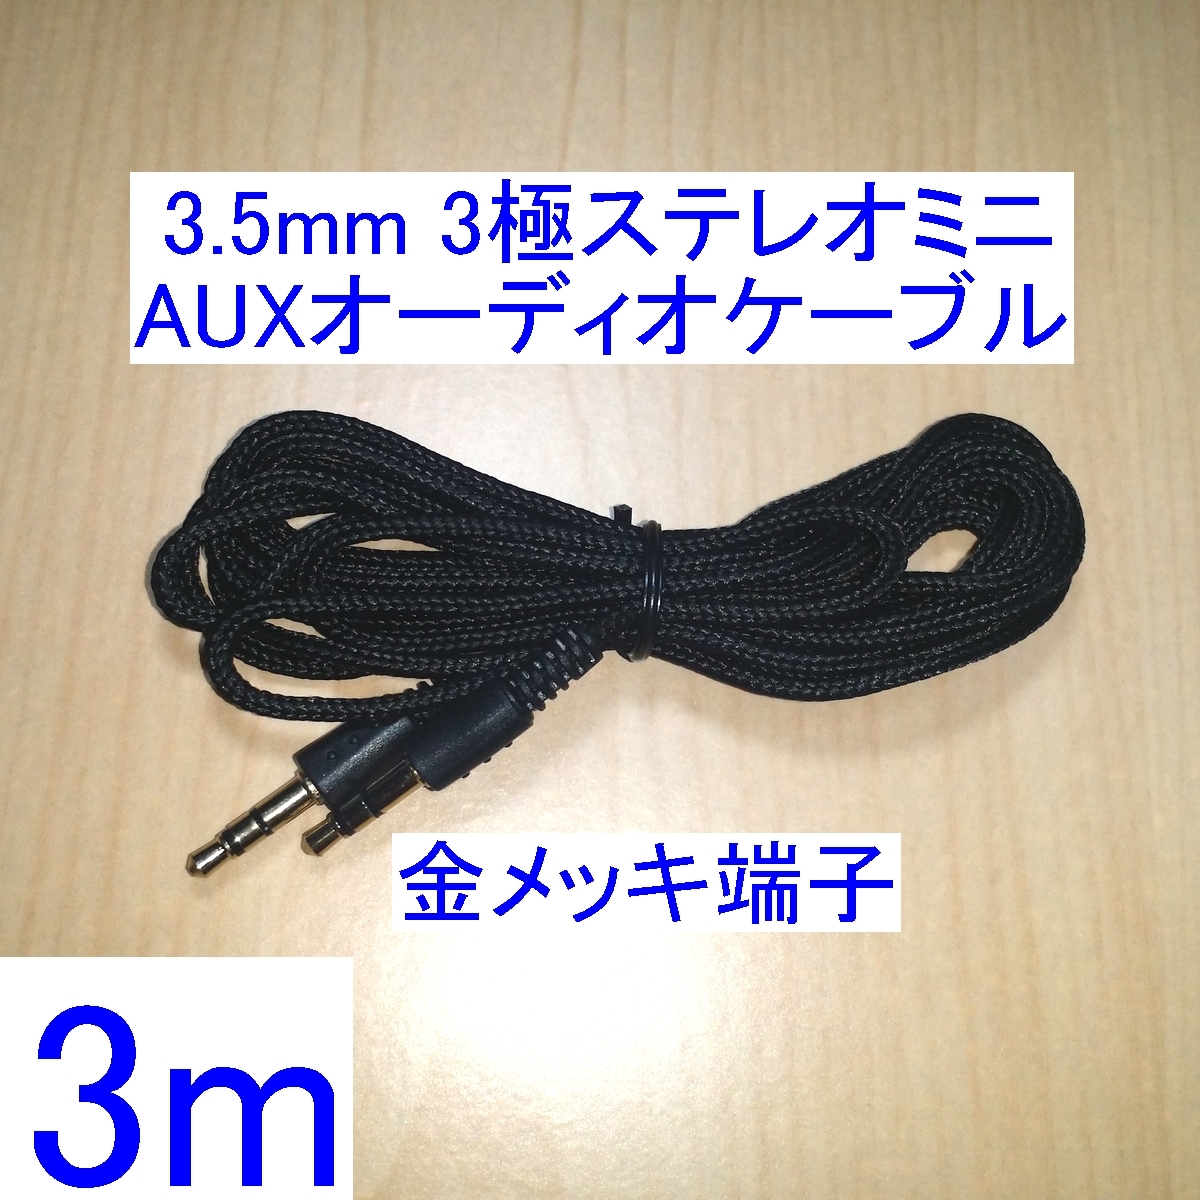 [ including carriage / prompt decision ]3.5mm 3 ultimate stereo Mini plug AUX audio cable 3m new goods both edge male speaker. connection . gilding terminal 